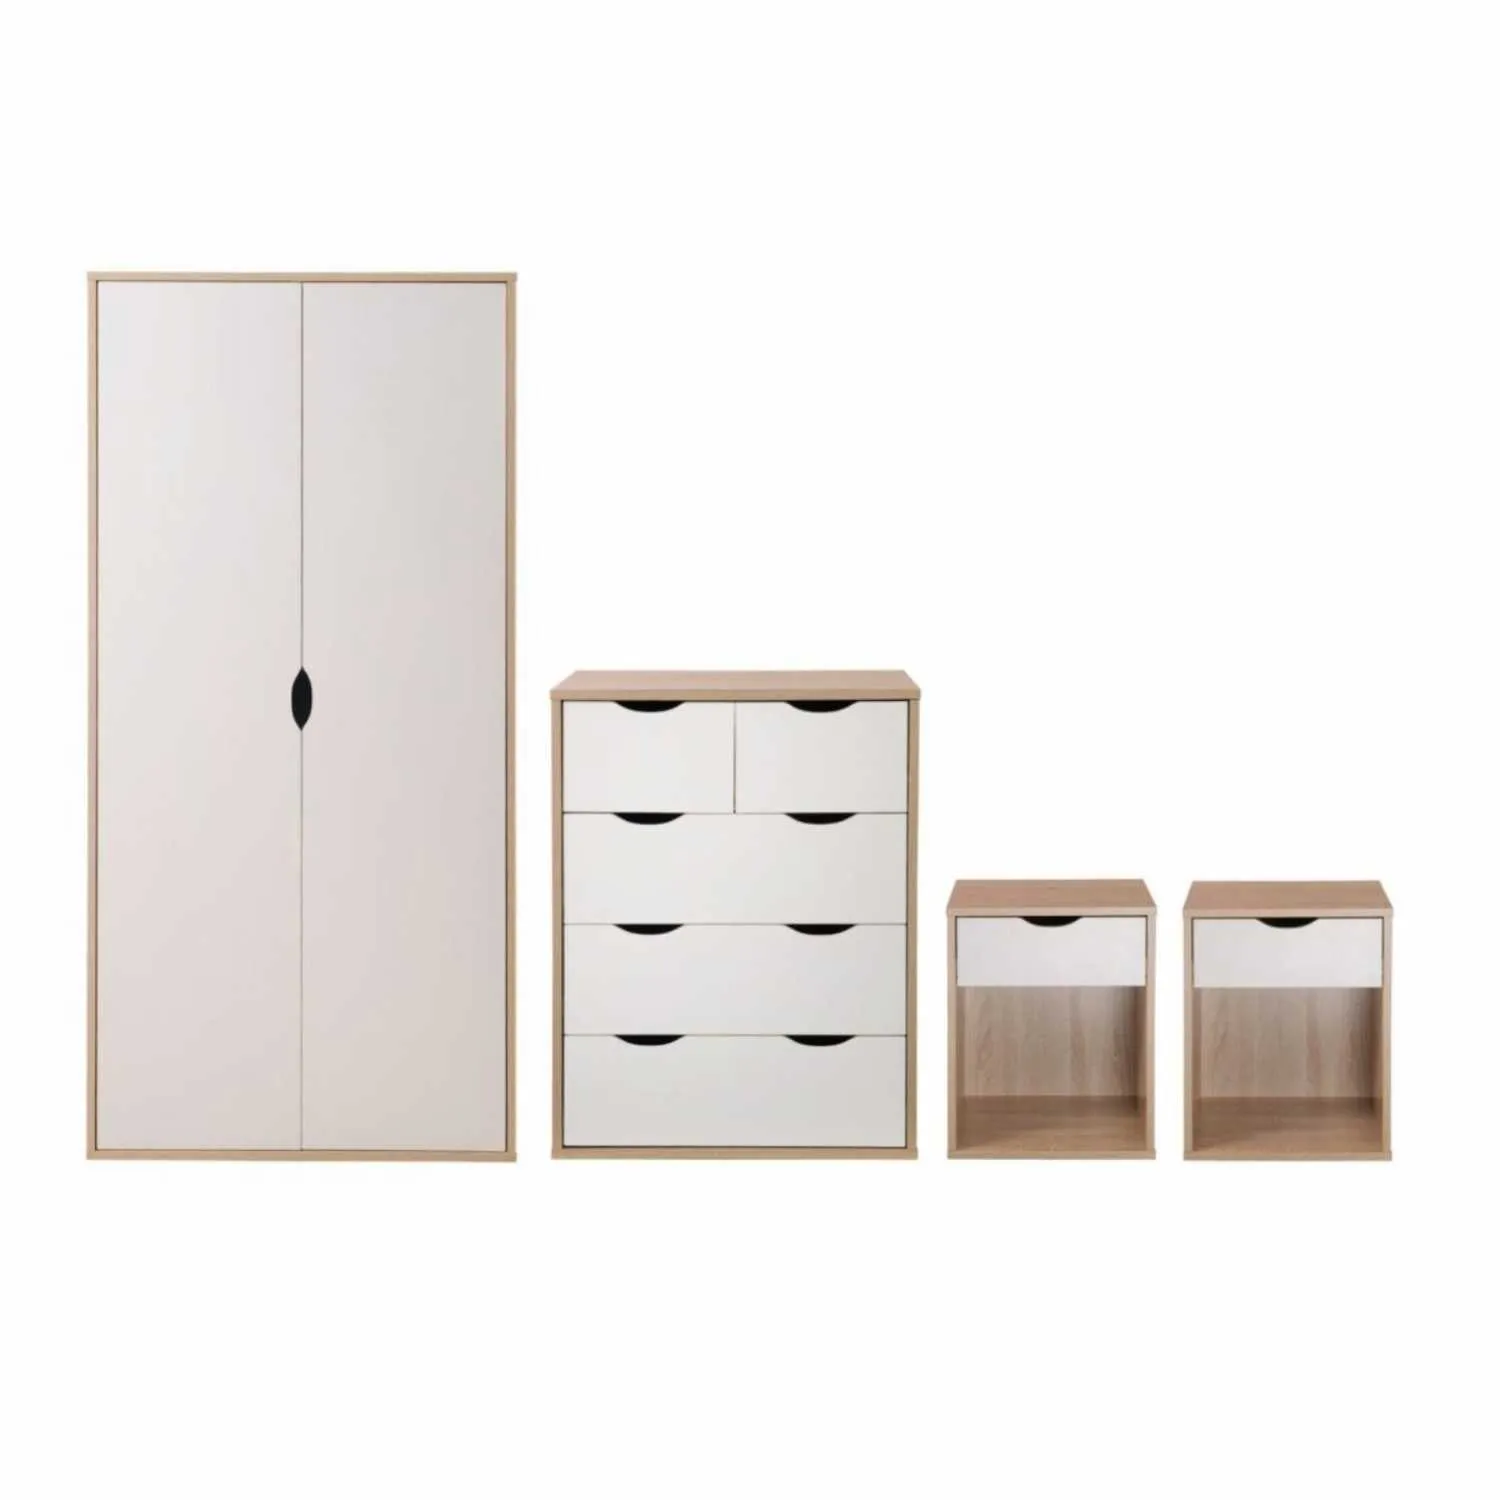 4 Piece Bedroom Set Light Oak and White Chest of 5 Drawers 2 Door Double Wardrobe 2 Bedside Tables